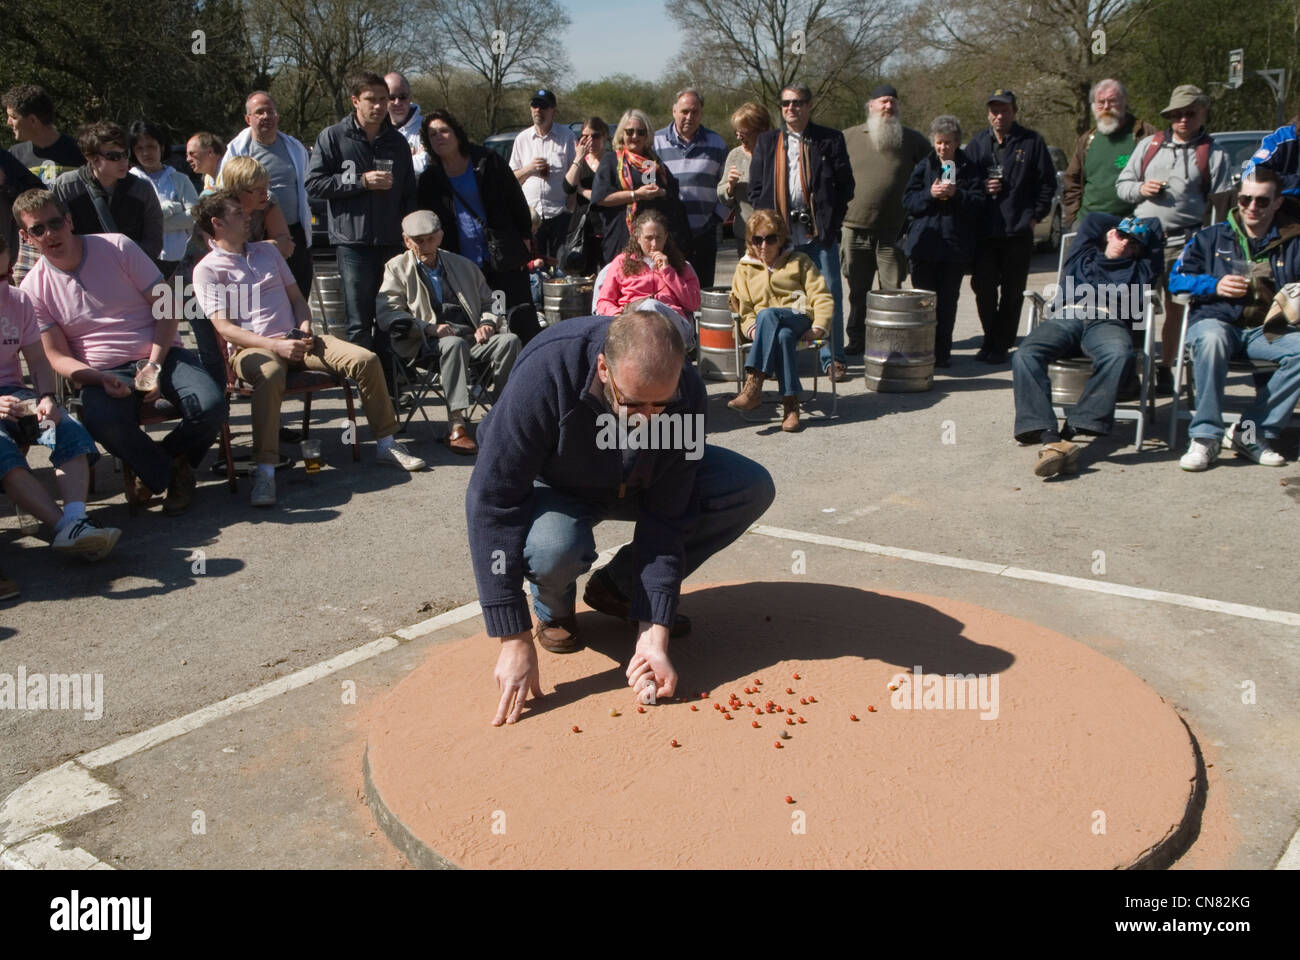 World Champion Marbles Championship Good Friday Tinsley Green Sussex UK. Played outside the Greyhound pub. 2012 2010s UK HOMER SYKES Stock Photo